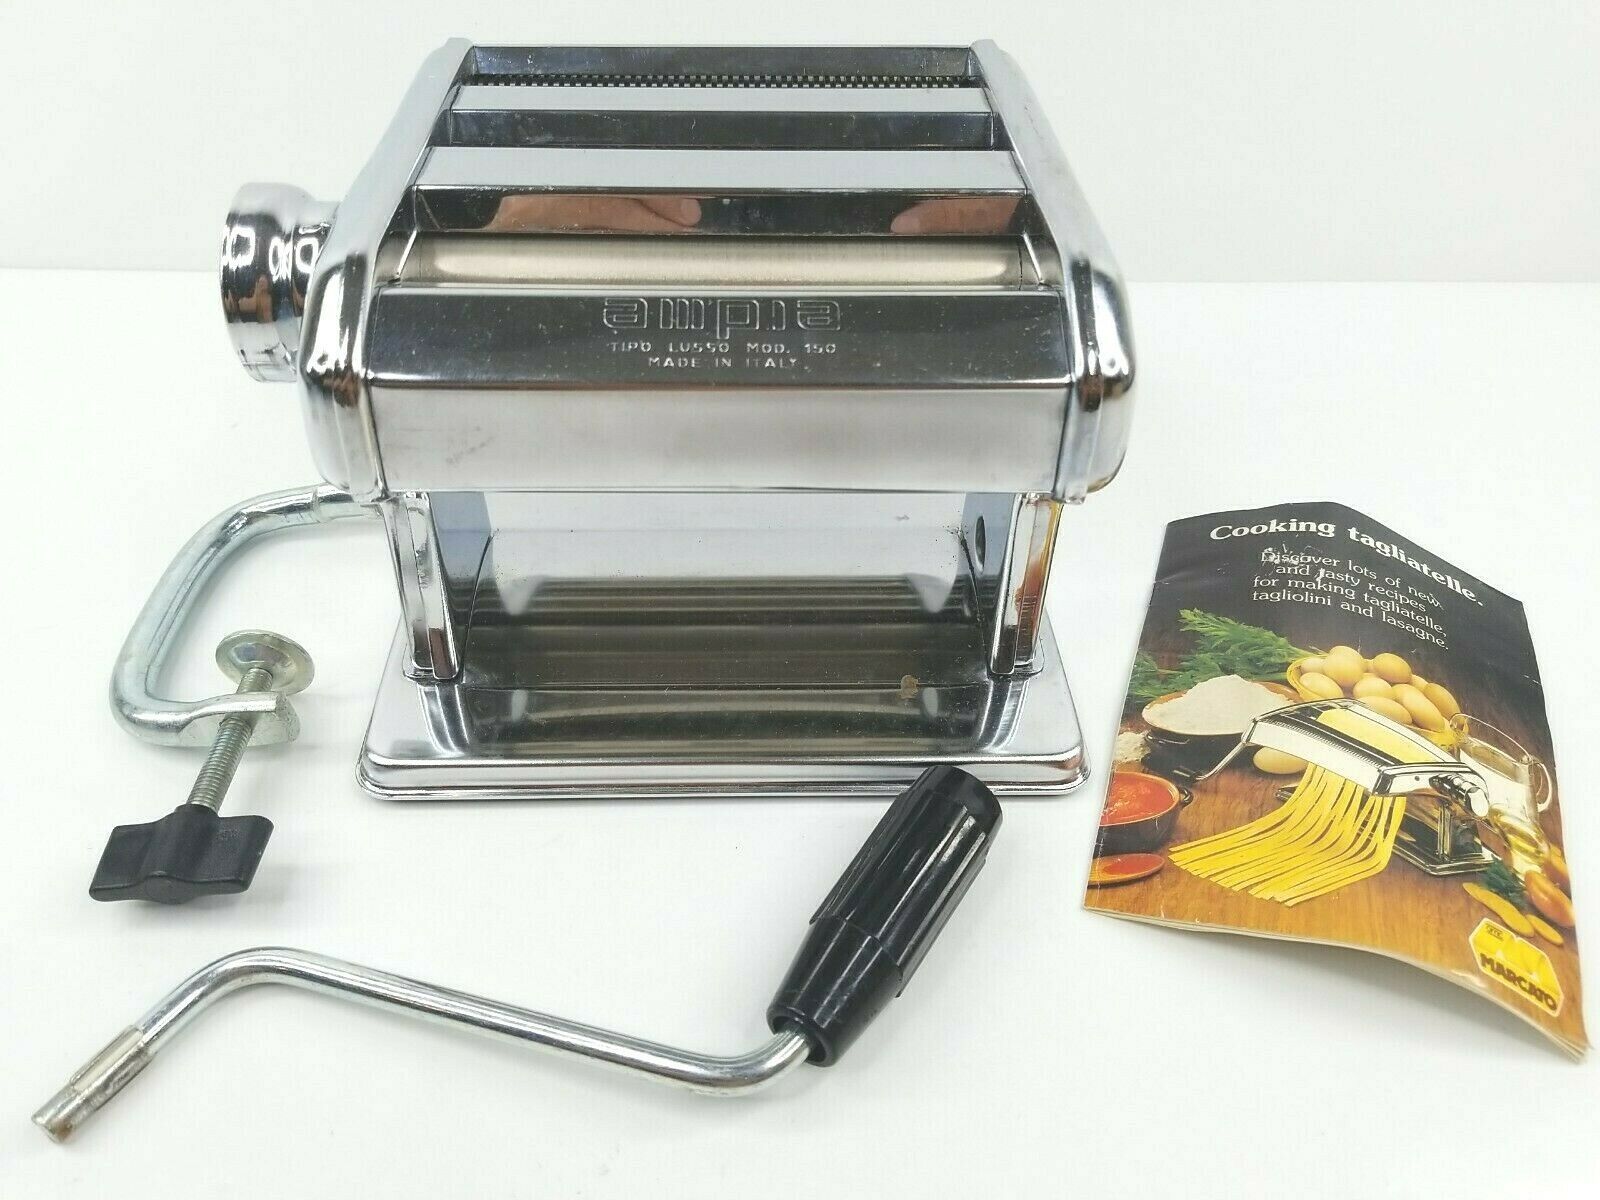 Vintage Villaware Imperia Pasta Making Machine Made in Italy